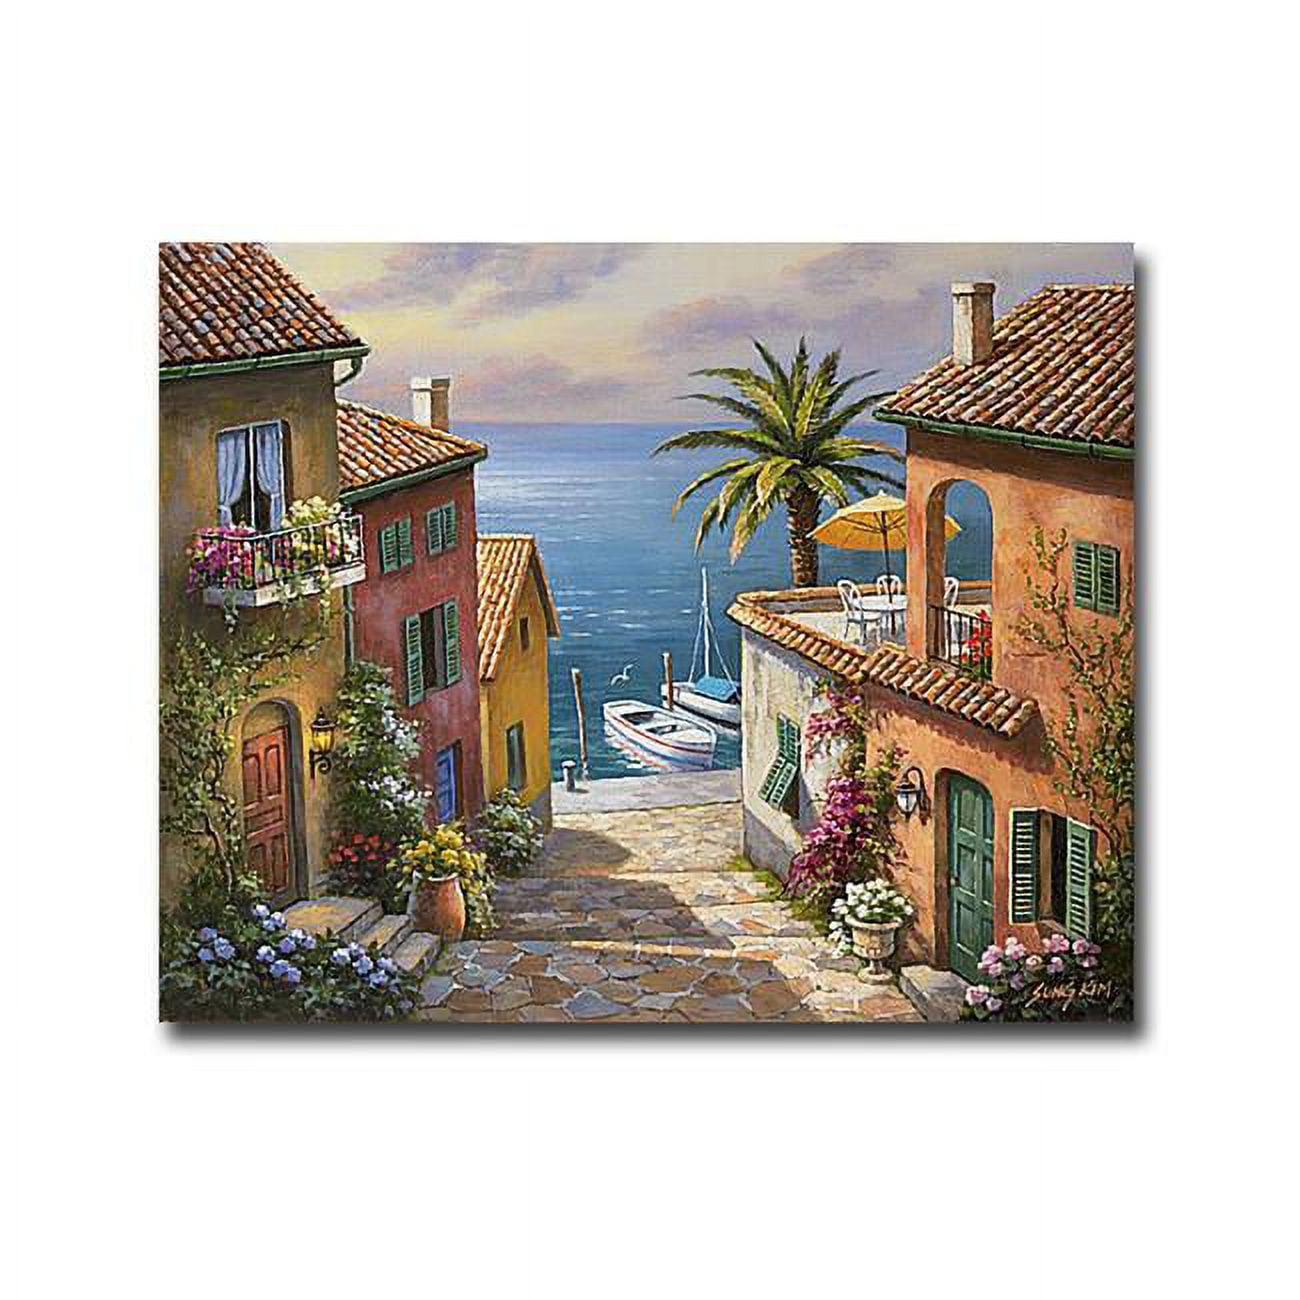 1620458ig The Villas Private Dock By Sung Kim Premium Gallery-wrapped Canvas Giclee Art - Ready-to-hang, 16 X 20 In.